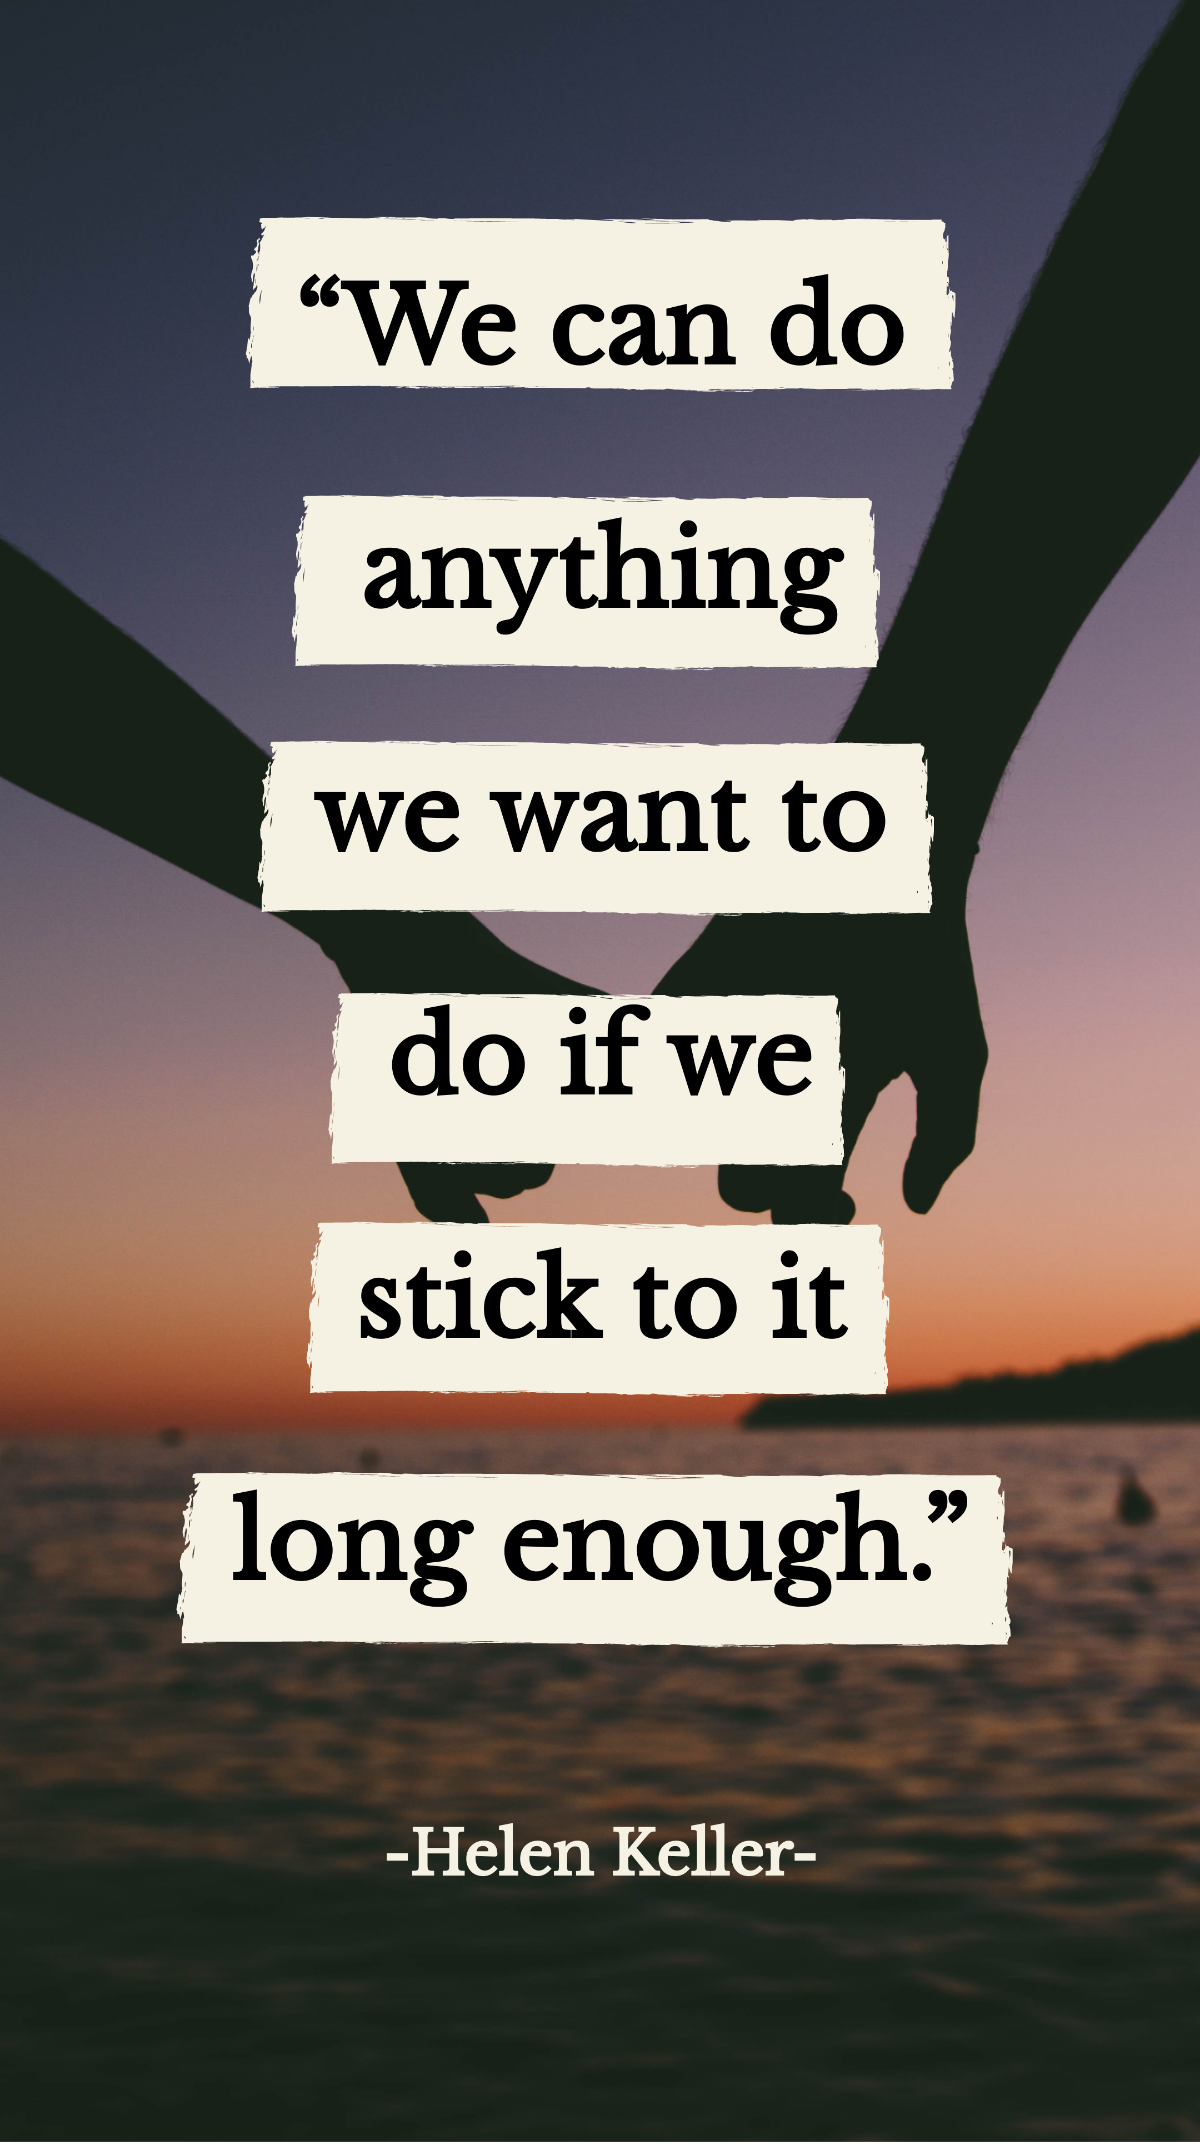 Helen Keller - “We can do anything we want to do if we stick to it long enough.”